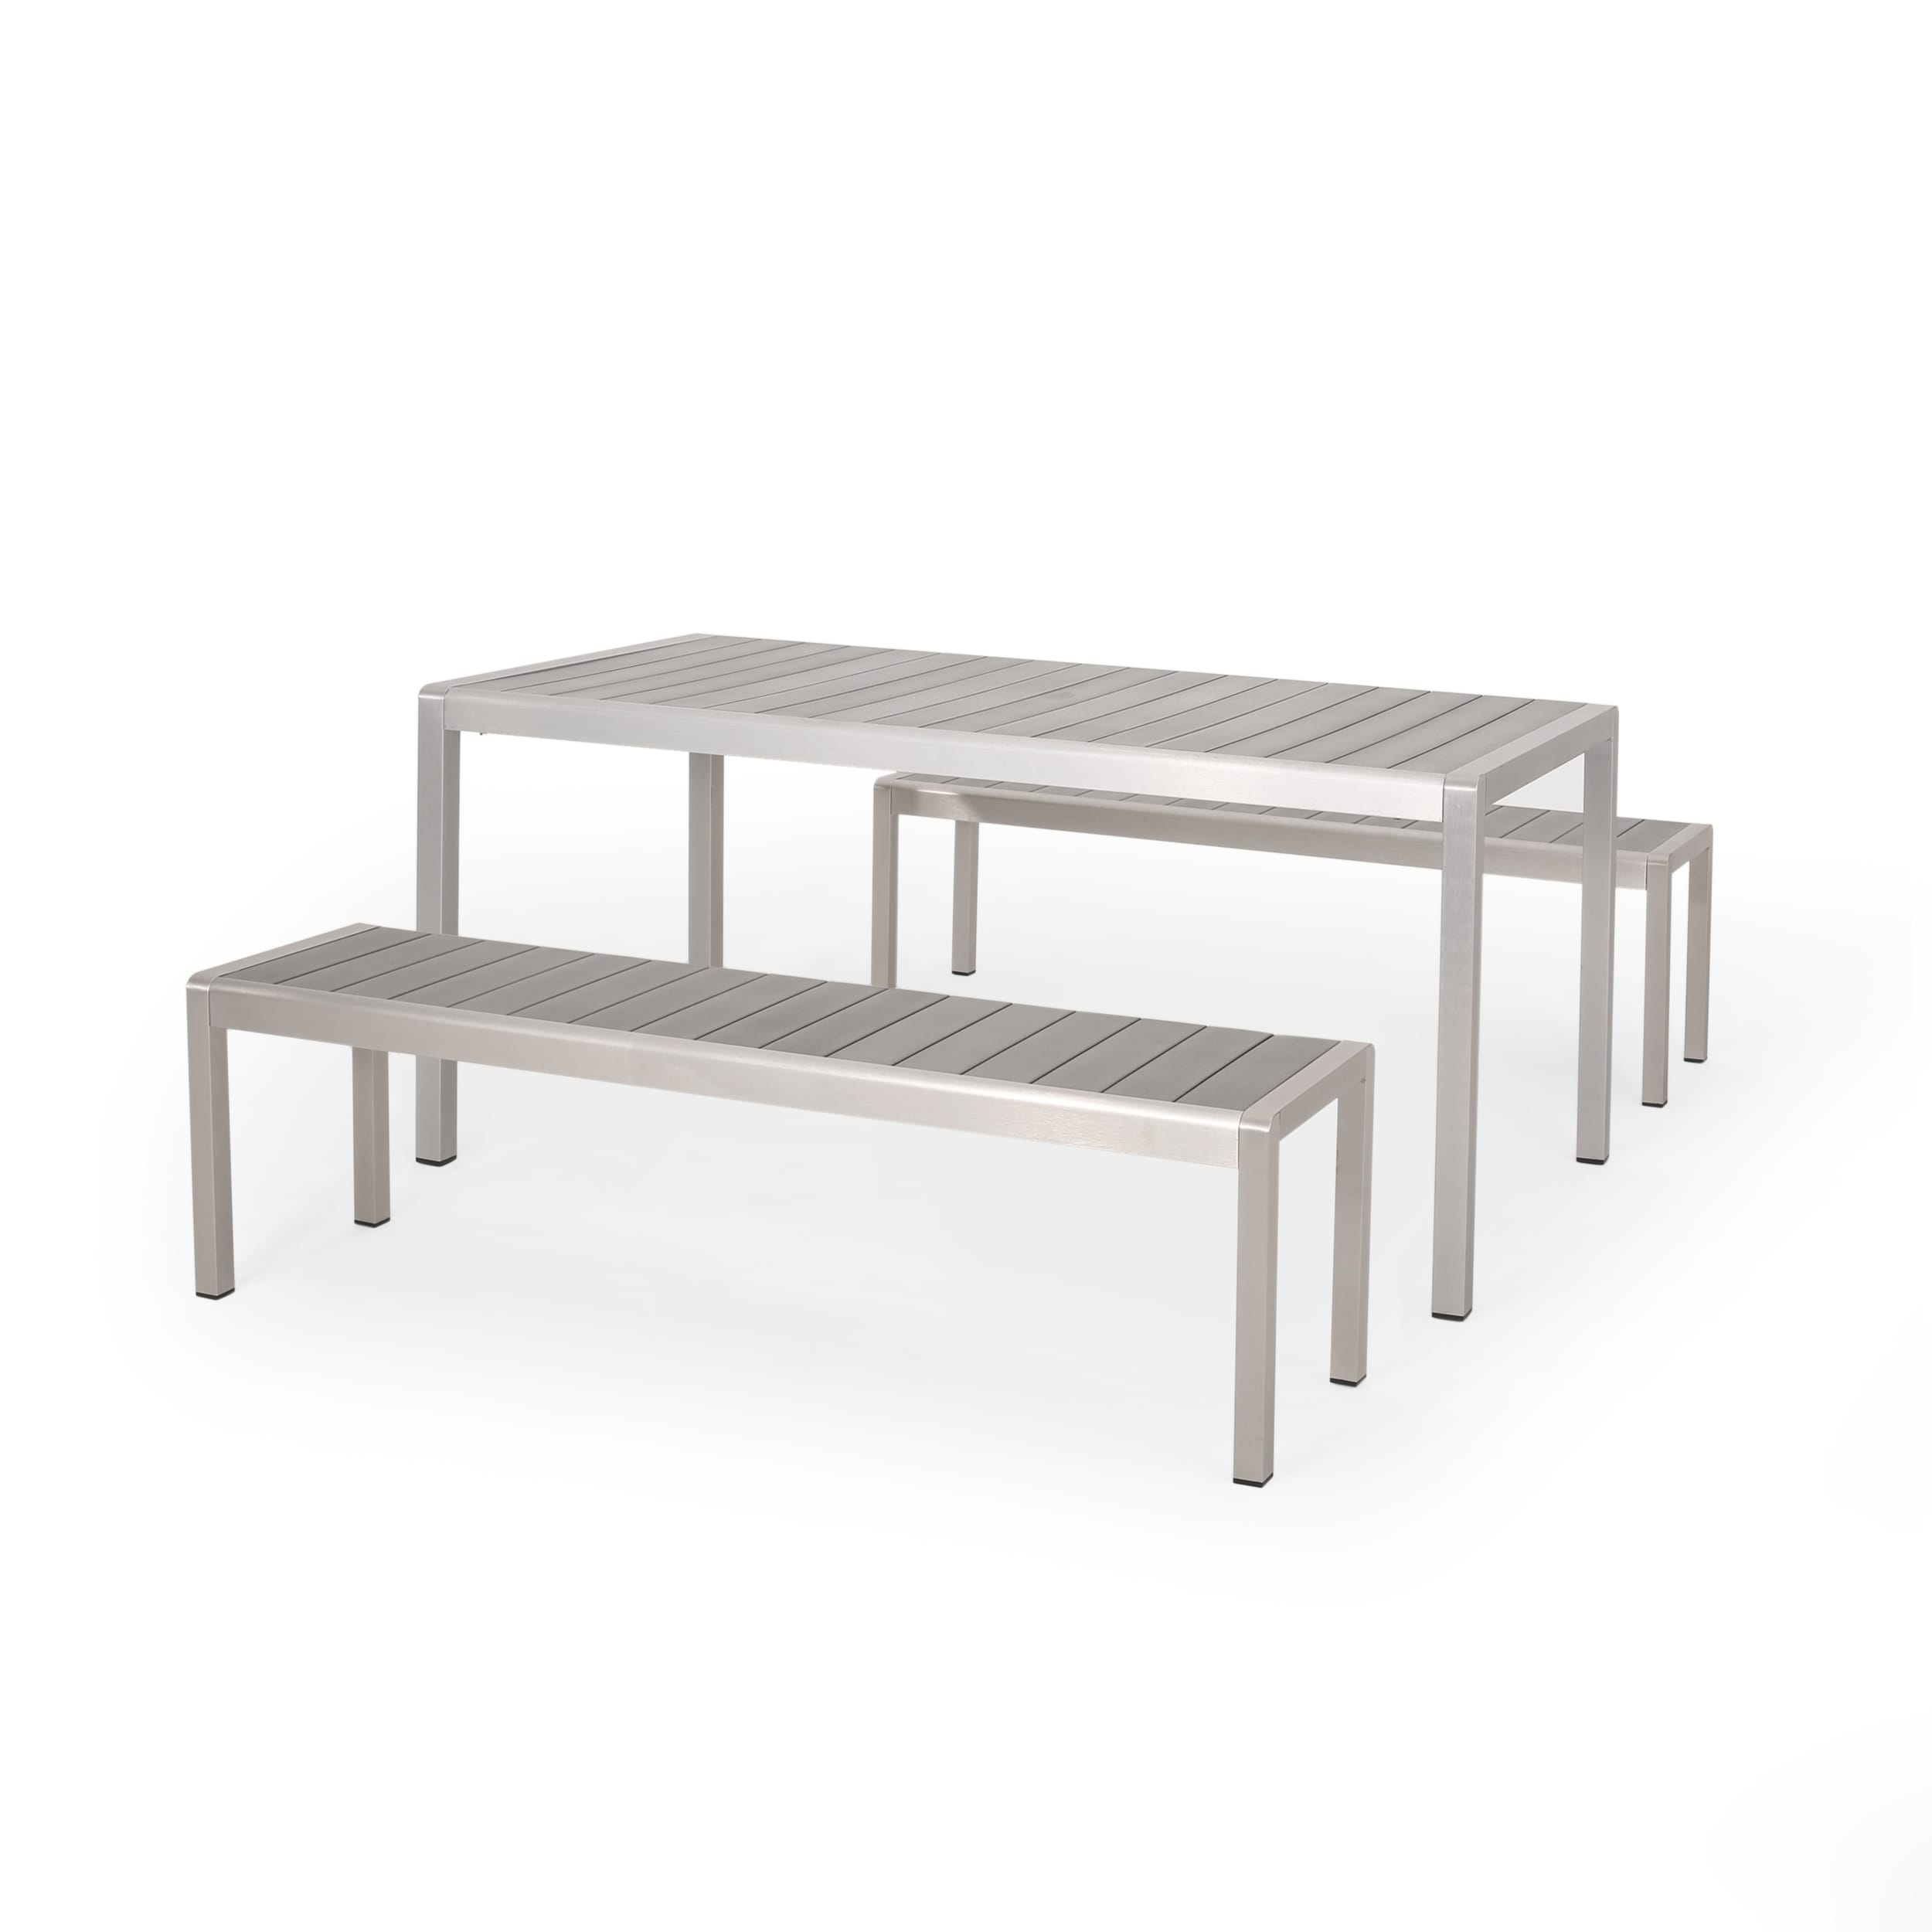 Cape Coral Faux Wood/ Aluminum Outdoor Picnic Table And Bench Set By Christopher Knight Home